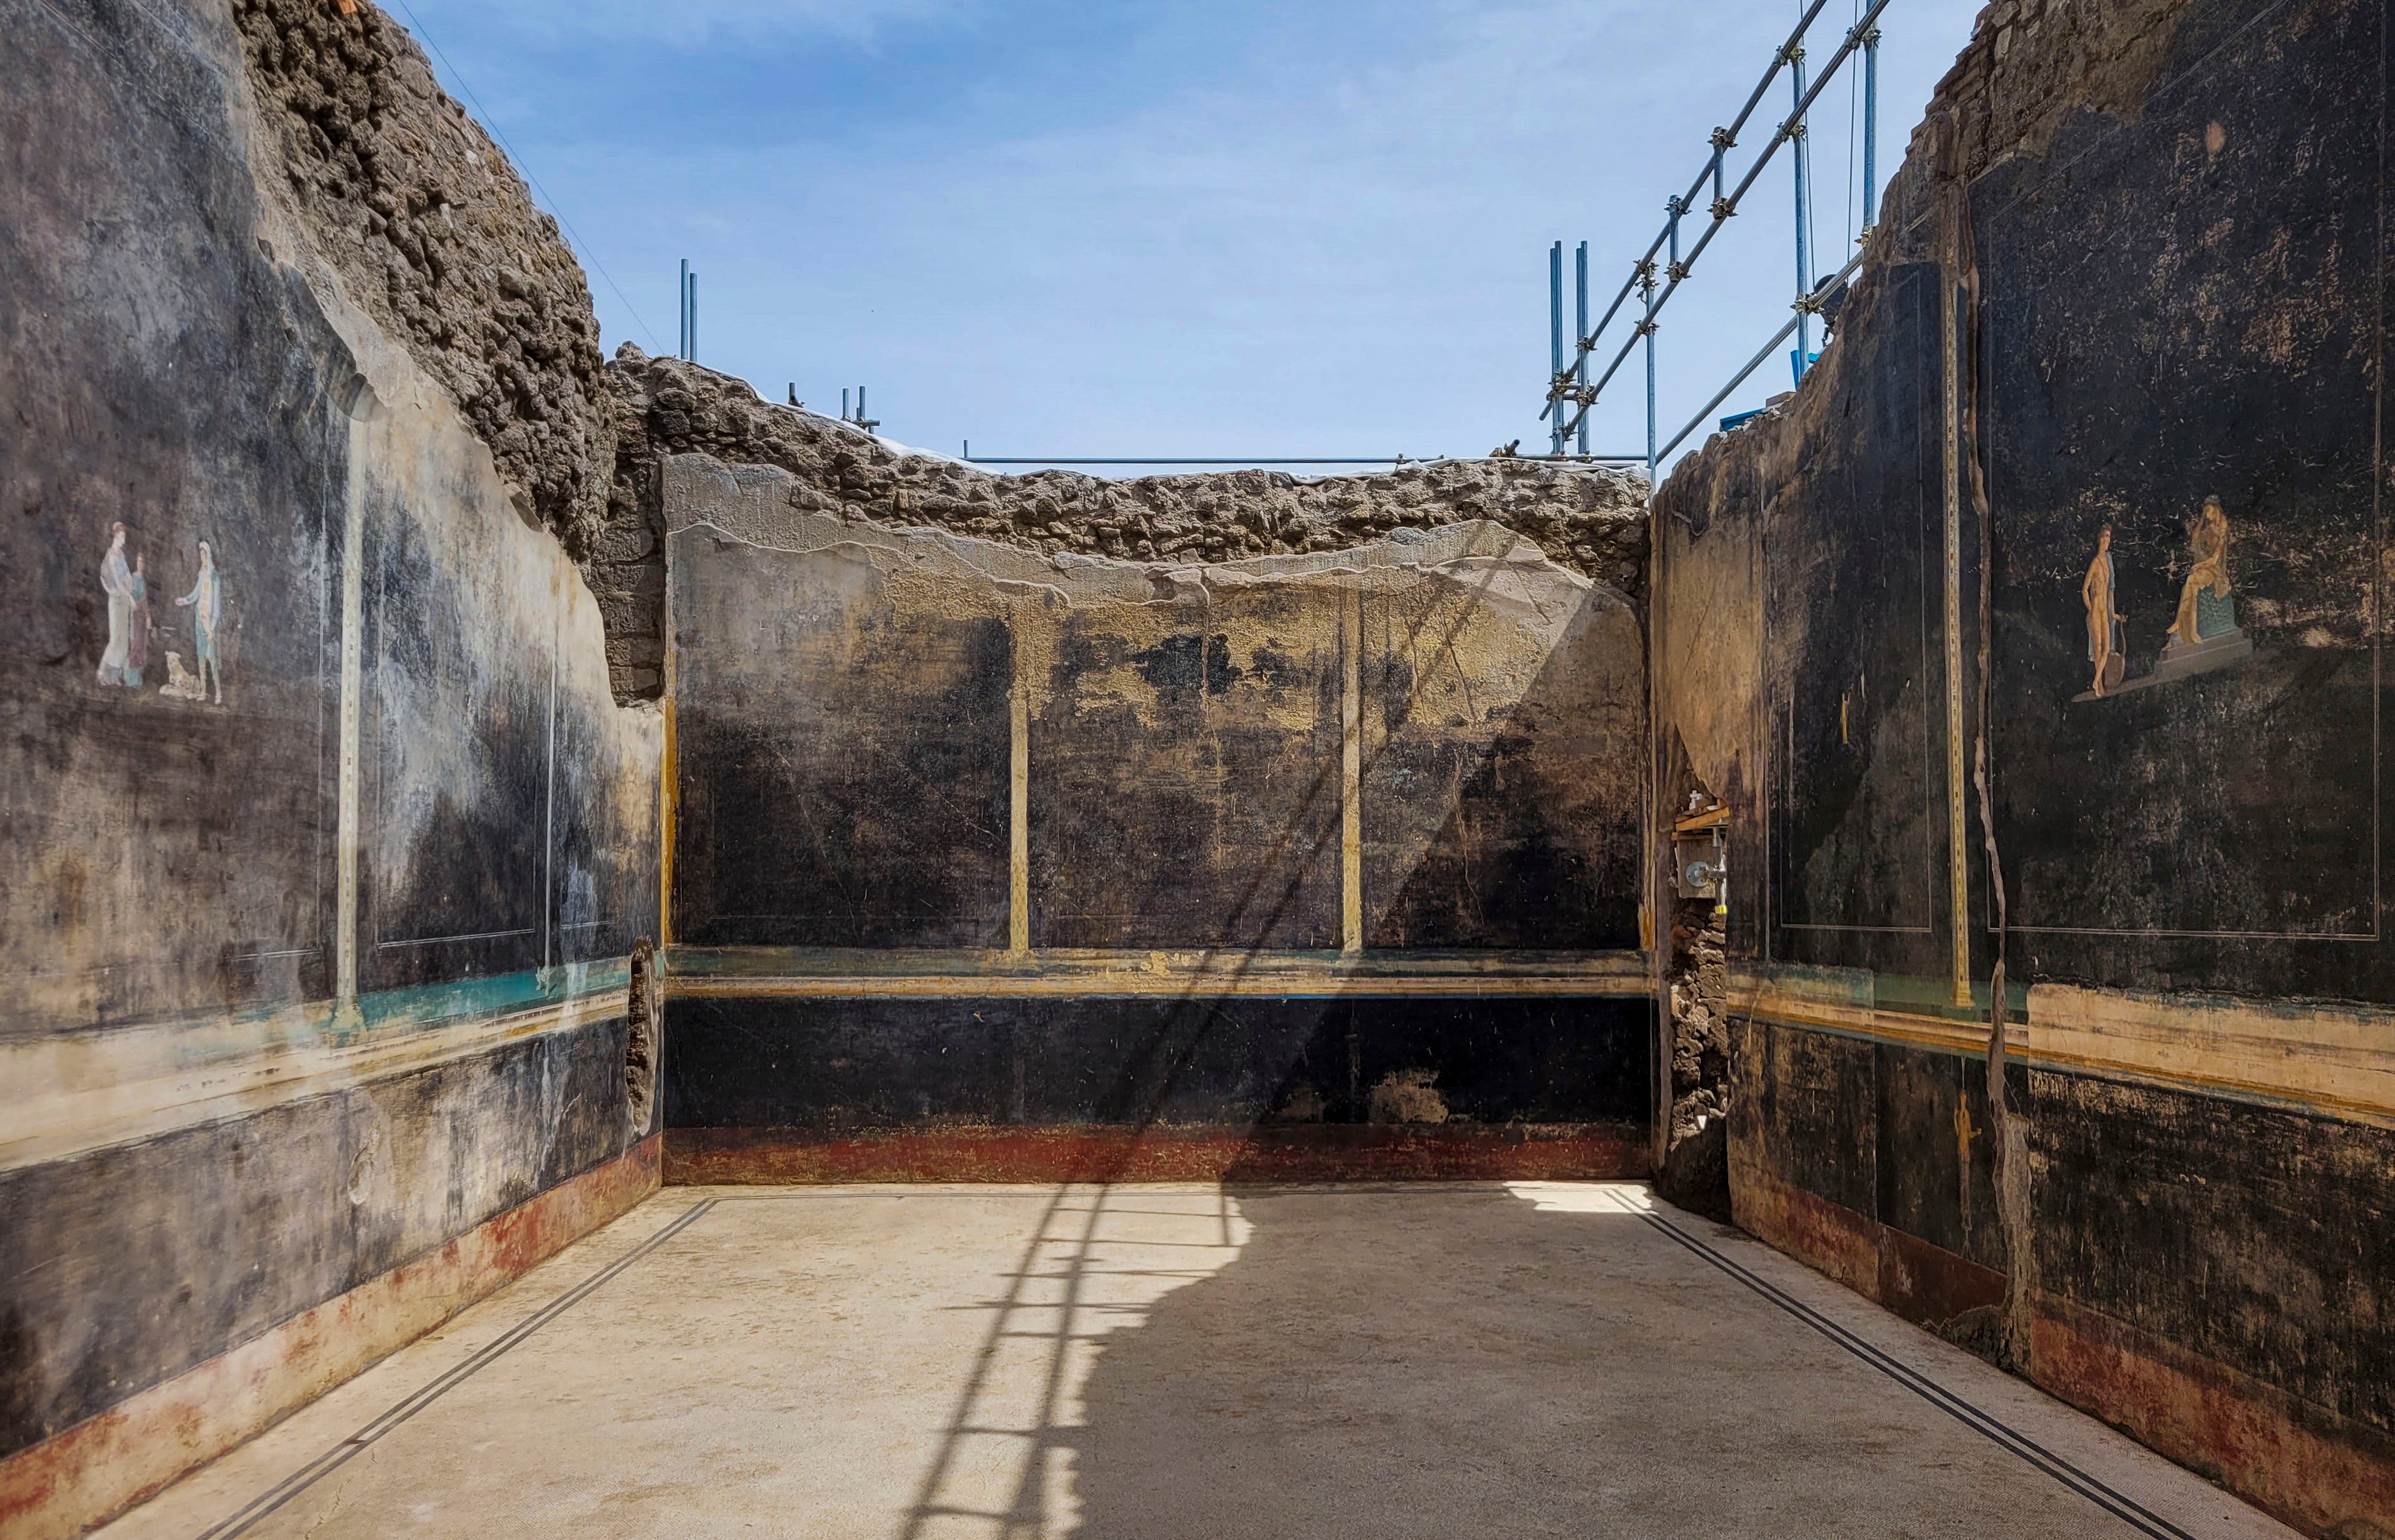 A a banquet hall, with elegant black walls, decorated with mythological subjects inspired by the Trojan War, recently unhearted in the Pompeii archaeological area near Naples in southern Italy